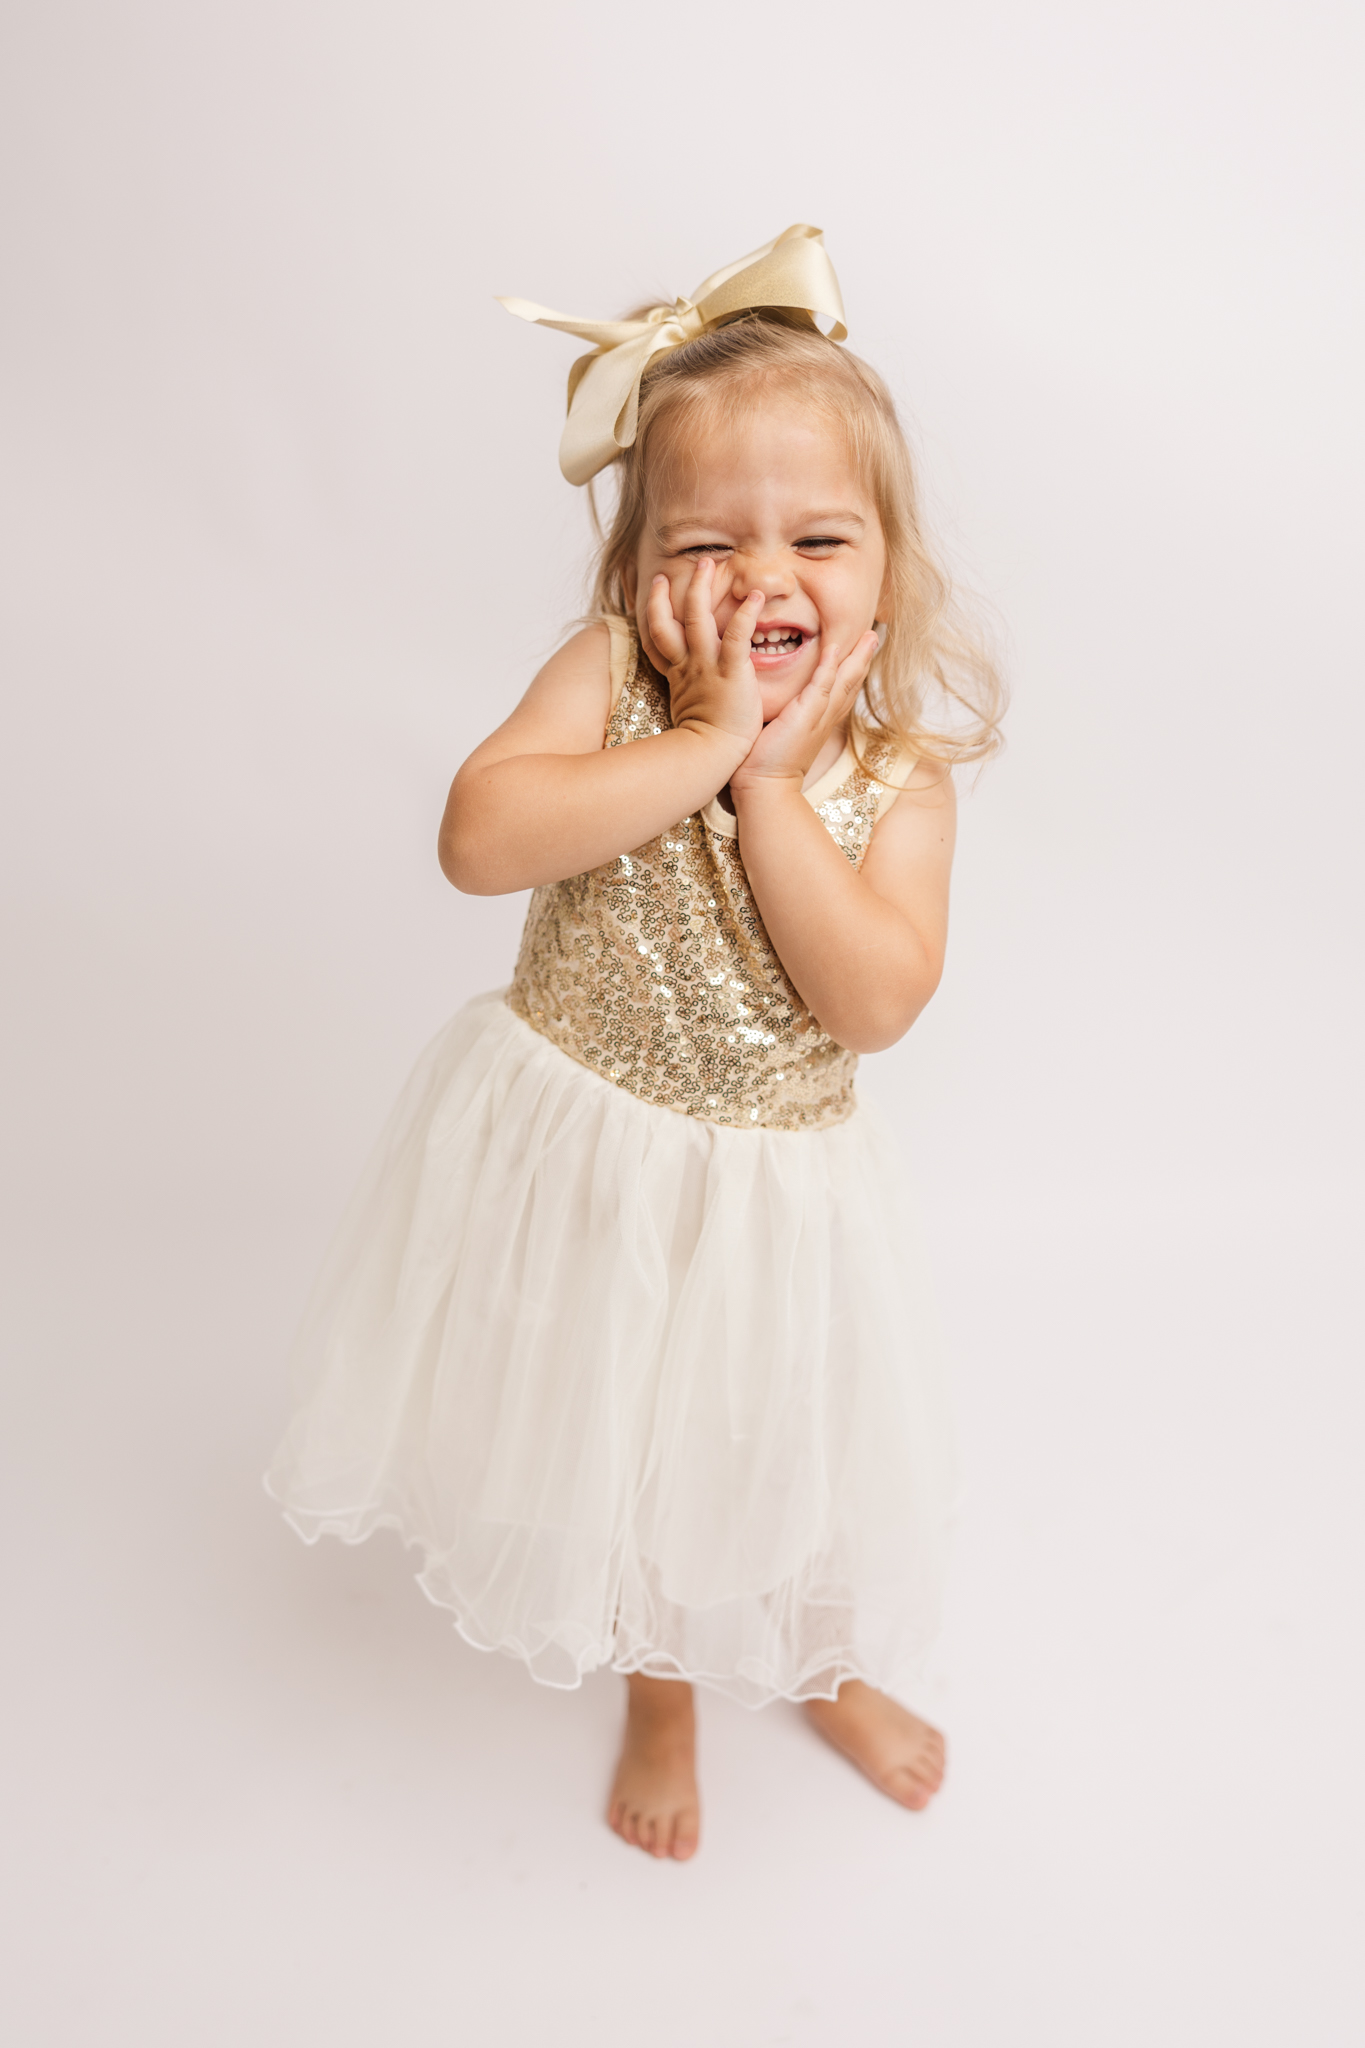 Two year old twirling during her milestone studio session.